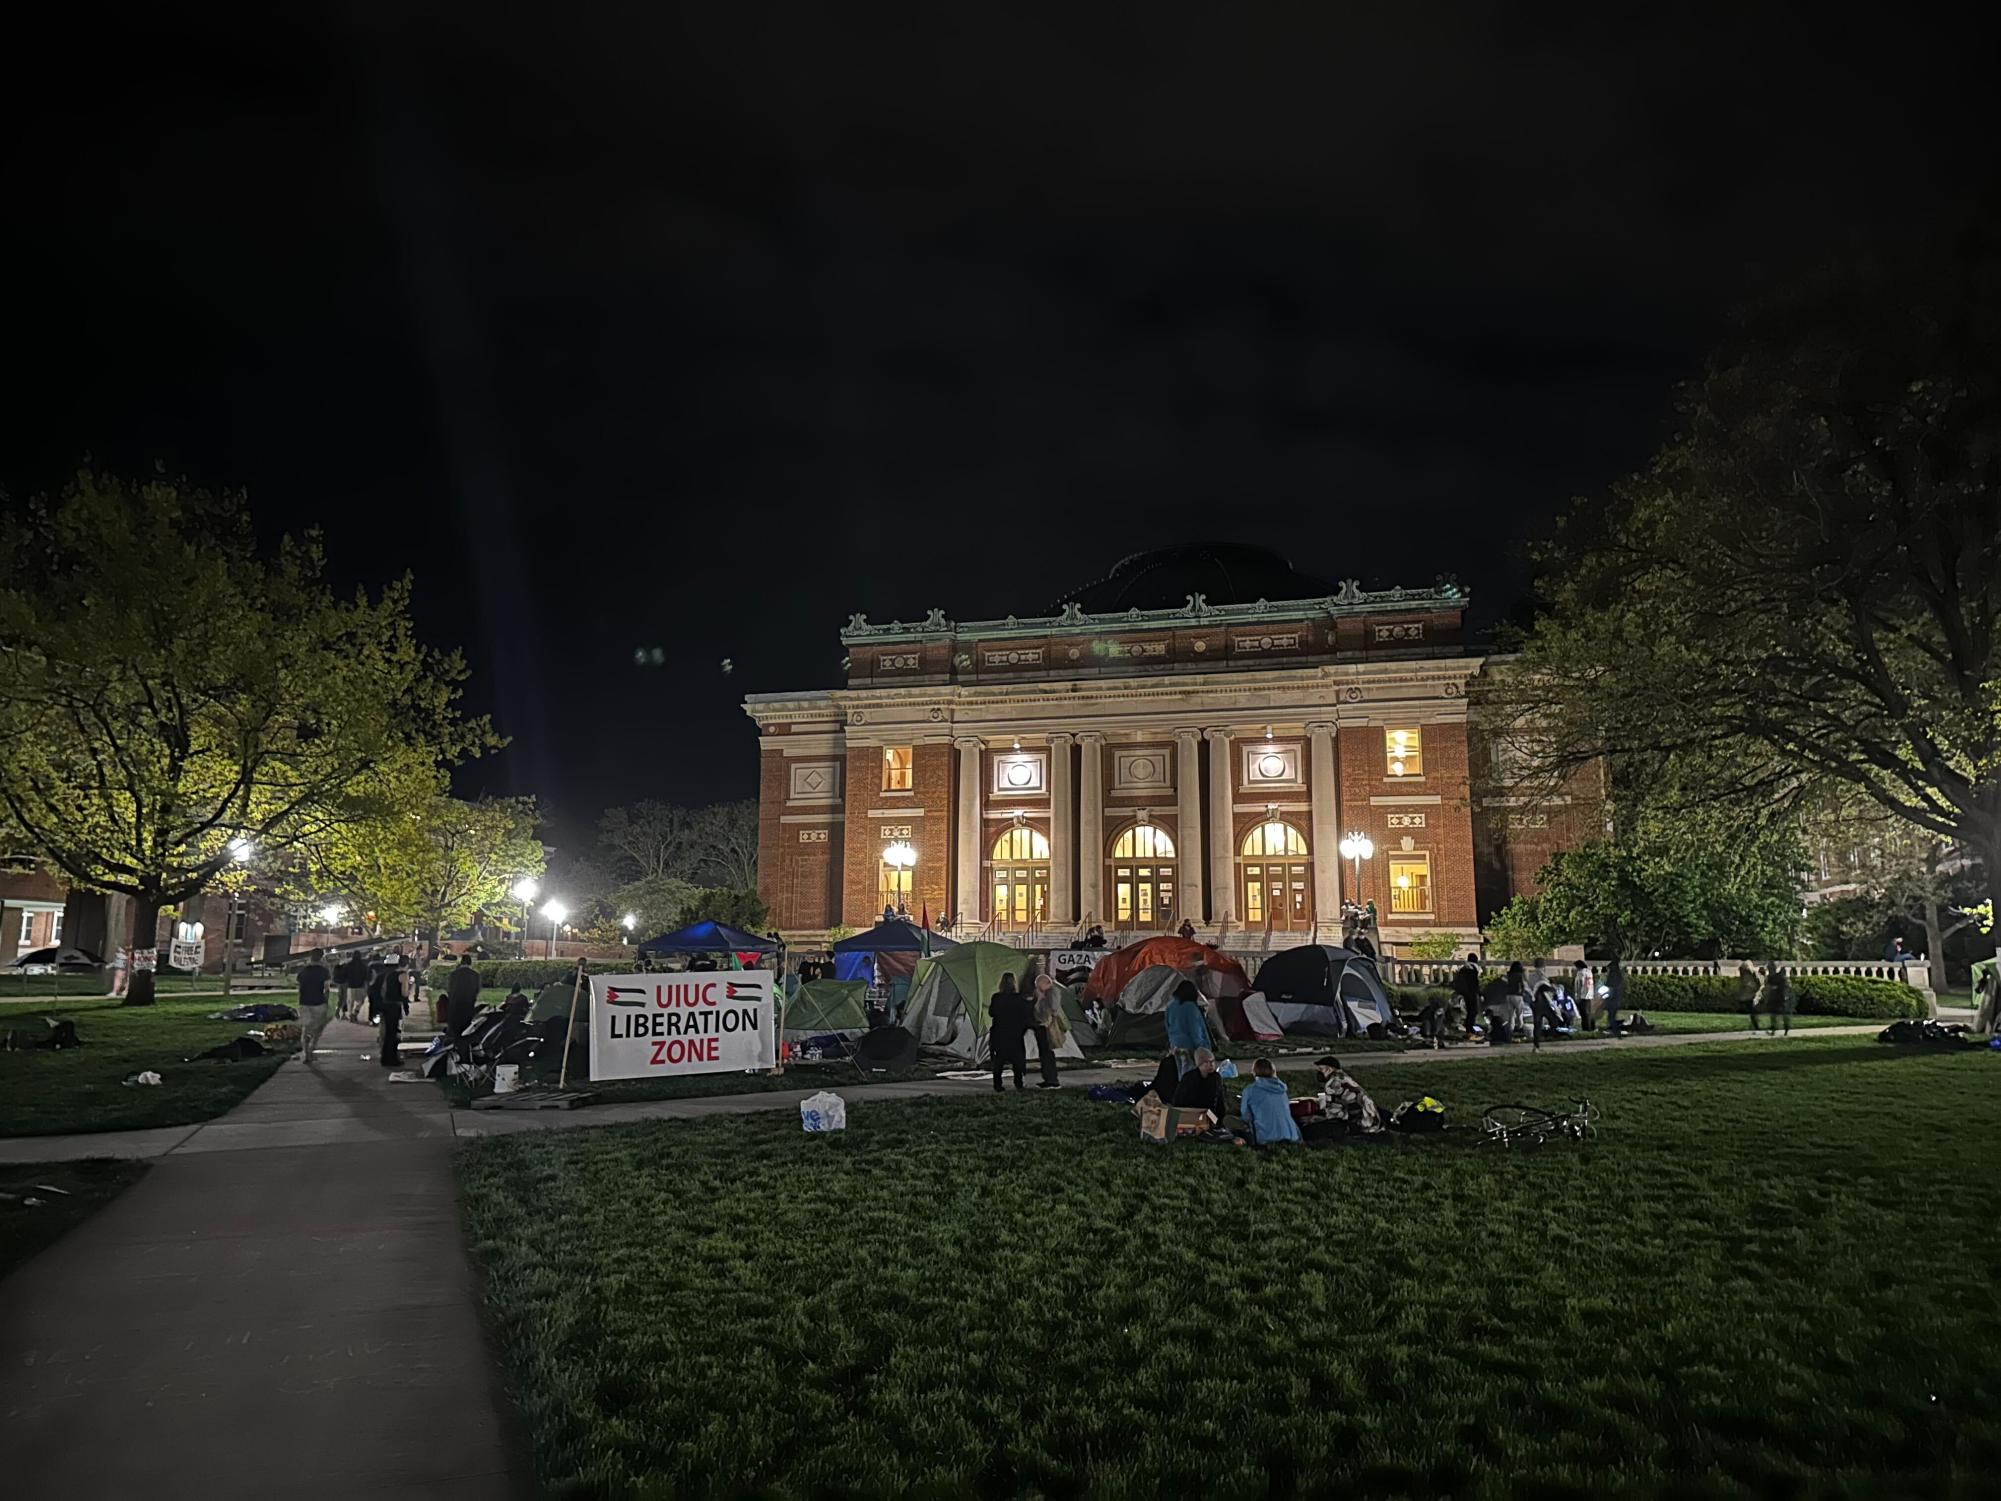 The encampment at around midnight on Sunday. Protesters remain on the Main Quad in tents and on the ground.